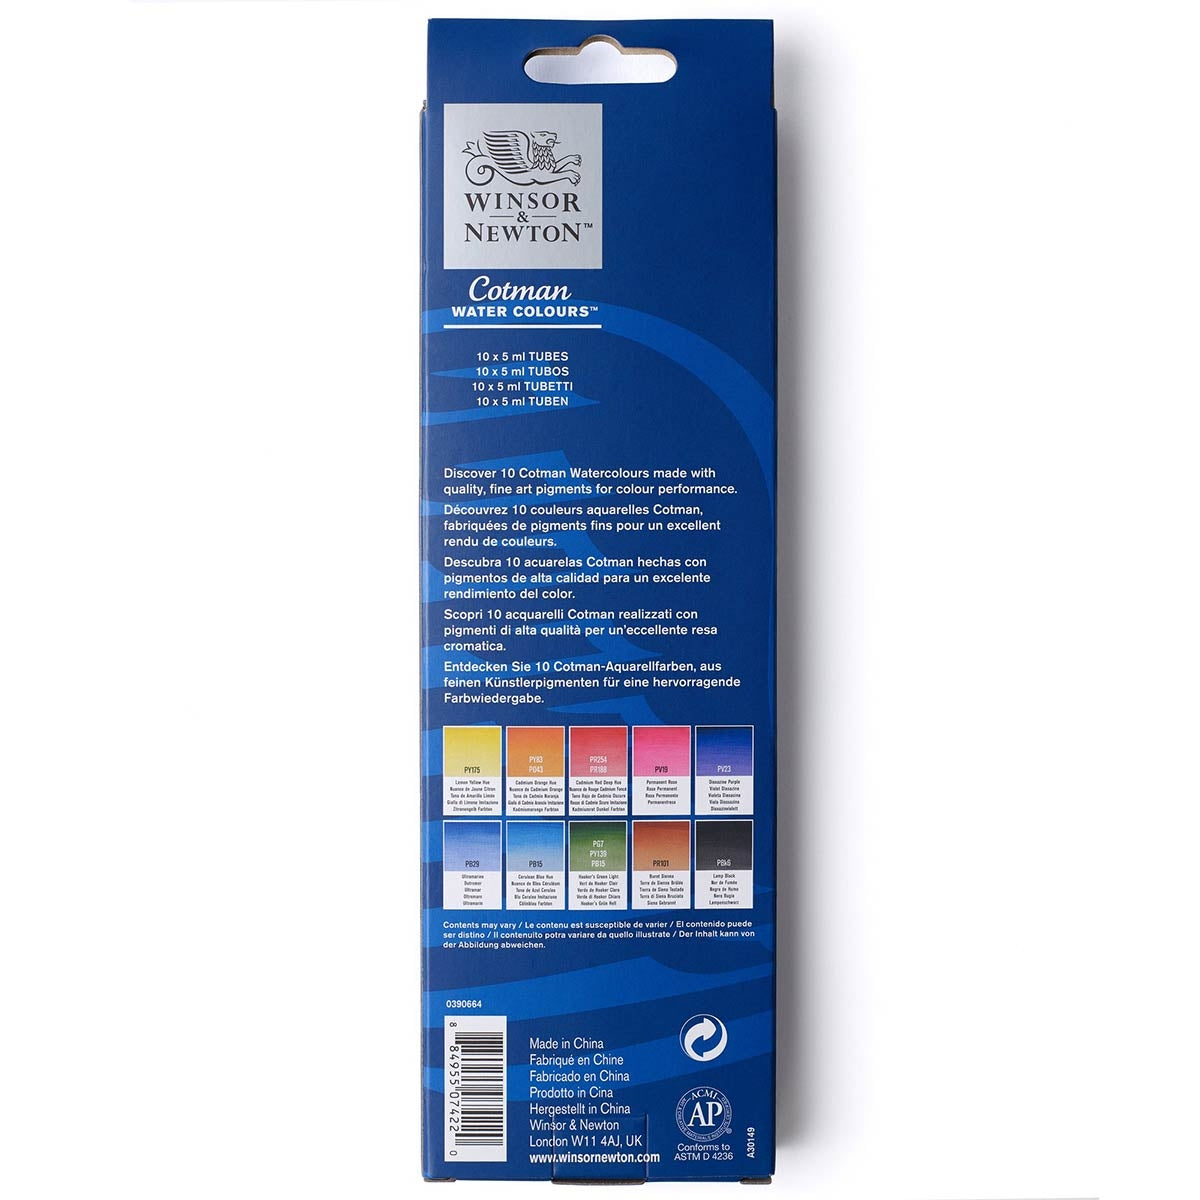 Winsor and Newton - Cotman Watercolour Discovery Set 10x5ml